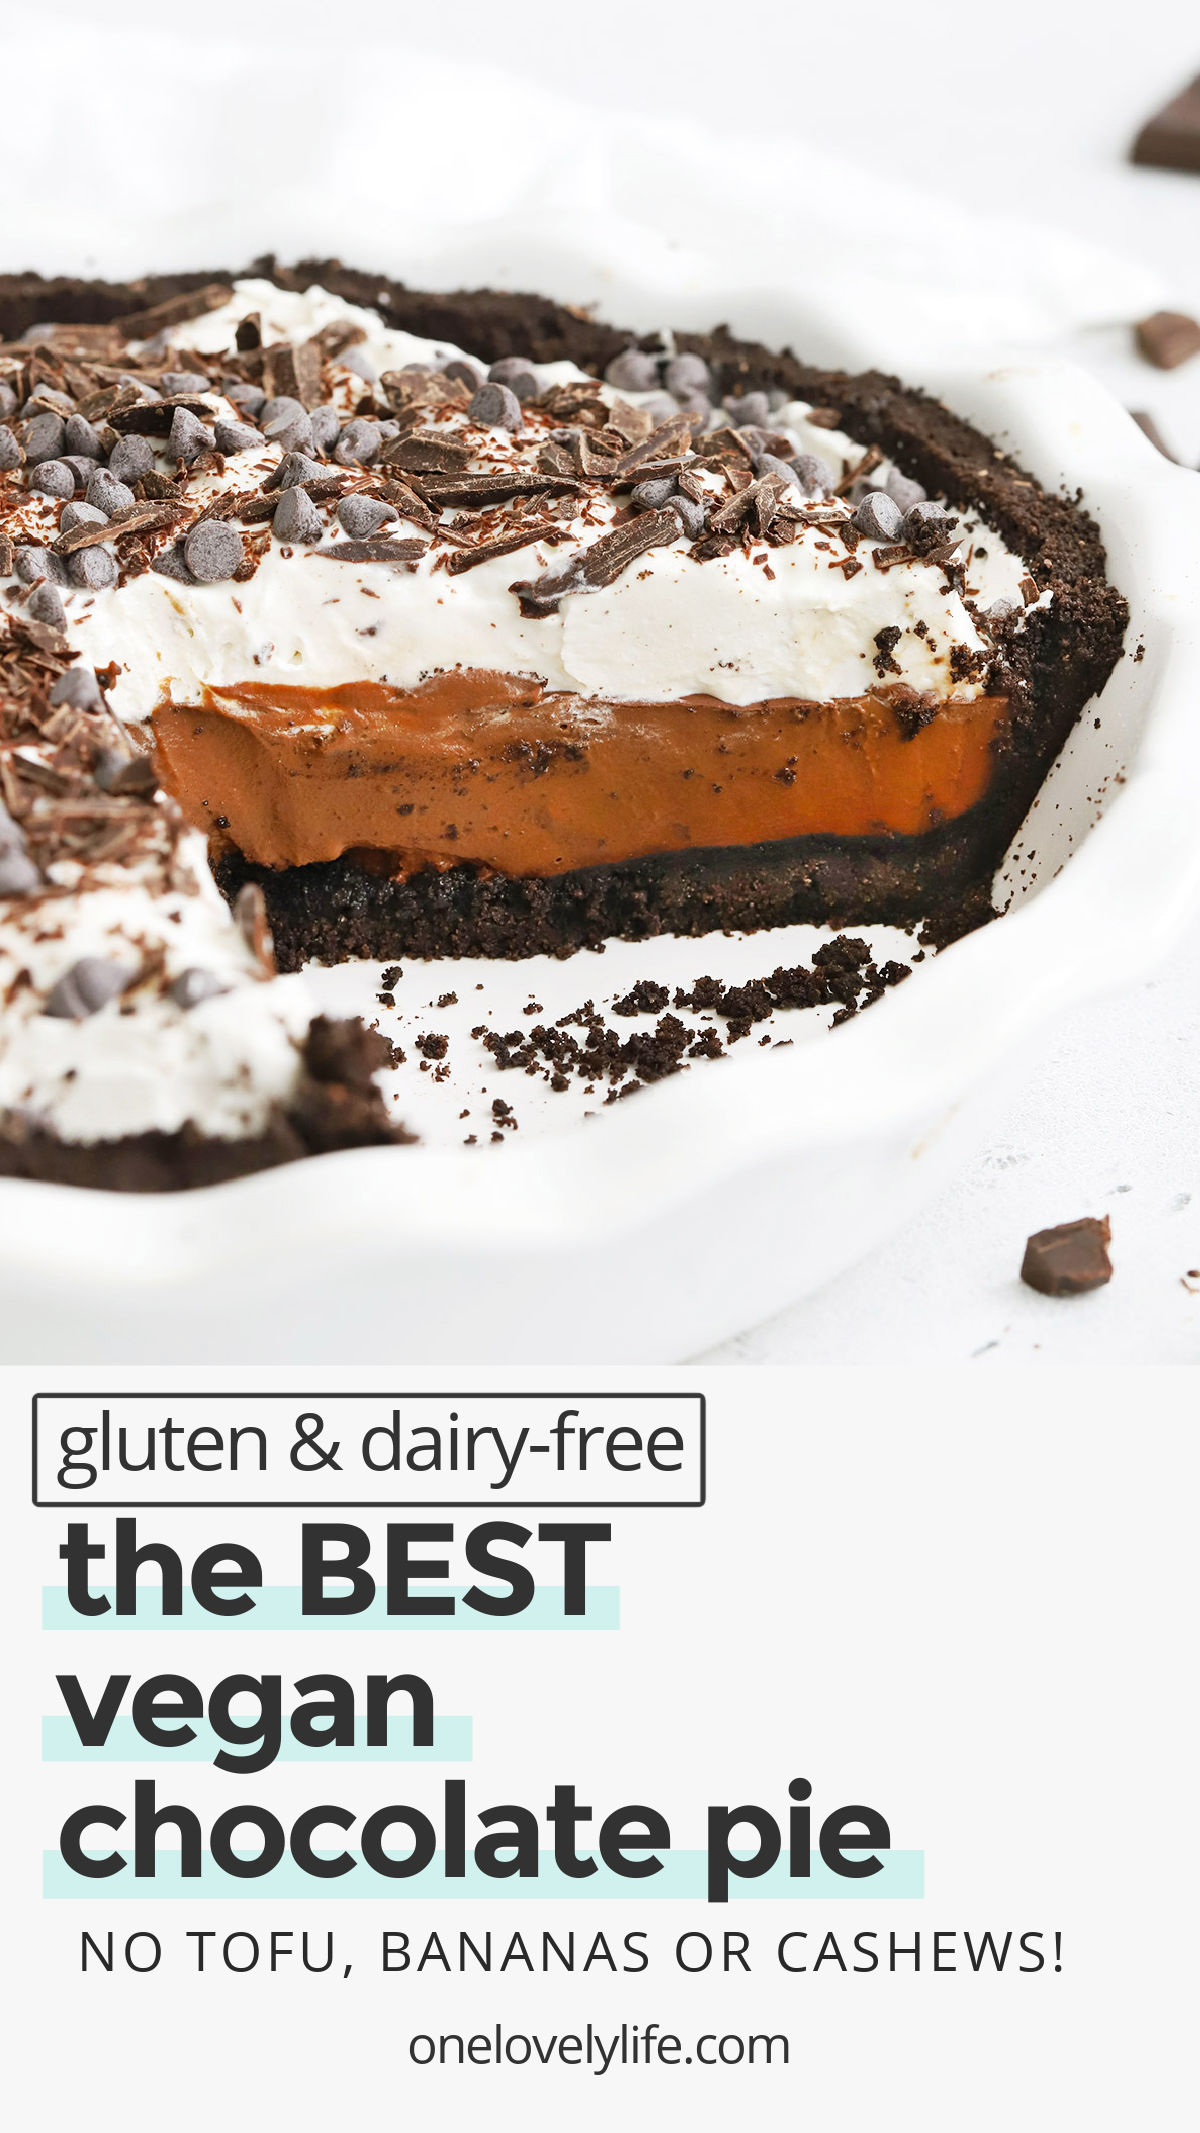 Vegan Chocolate Pie - This gorgeous dairy-free chocolate cream pie has a rich chocolatey filling and crispy chocolate cookie crust your whole family will flip for! (Gluten-Free, Dairy-Free) // Vegan Chocolate Pie // Dairy-Free Chocolate Pie // Vegan Chocolate Pudding Pie // Dairy-Free Chocolate cream pie // Dairy Free Chocolate Pie / Vegan Pie Recipe / Vegan Pudding Pie recipe